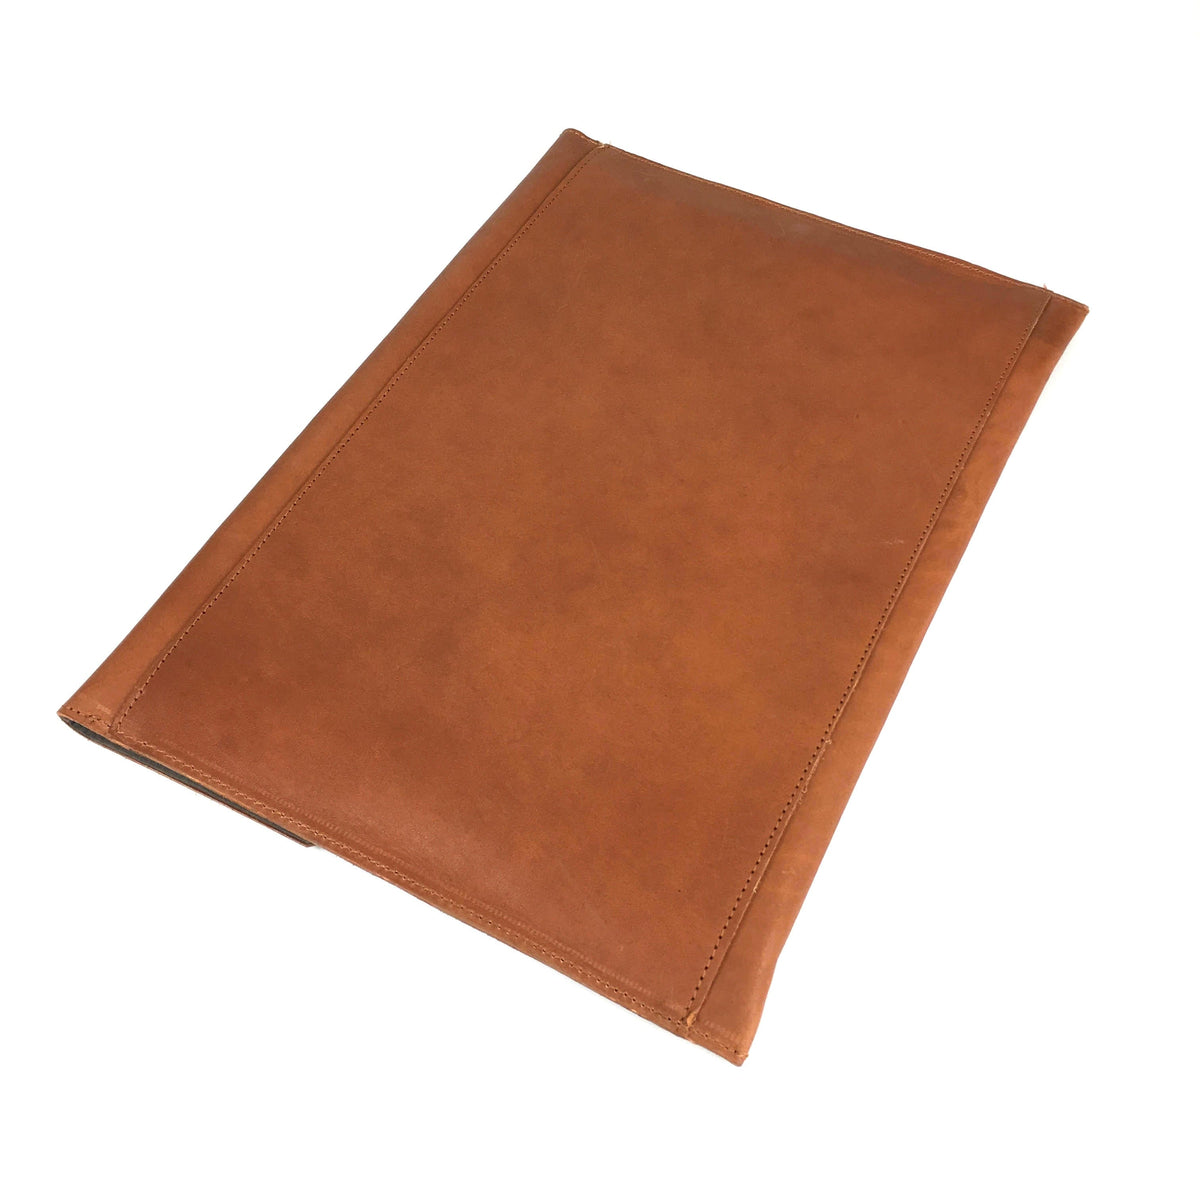 leather laptop case 13 inch. leather laptop cover. leather laptop sleeve. camel